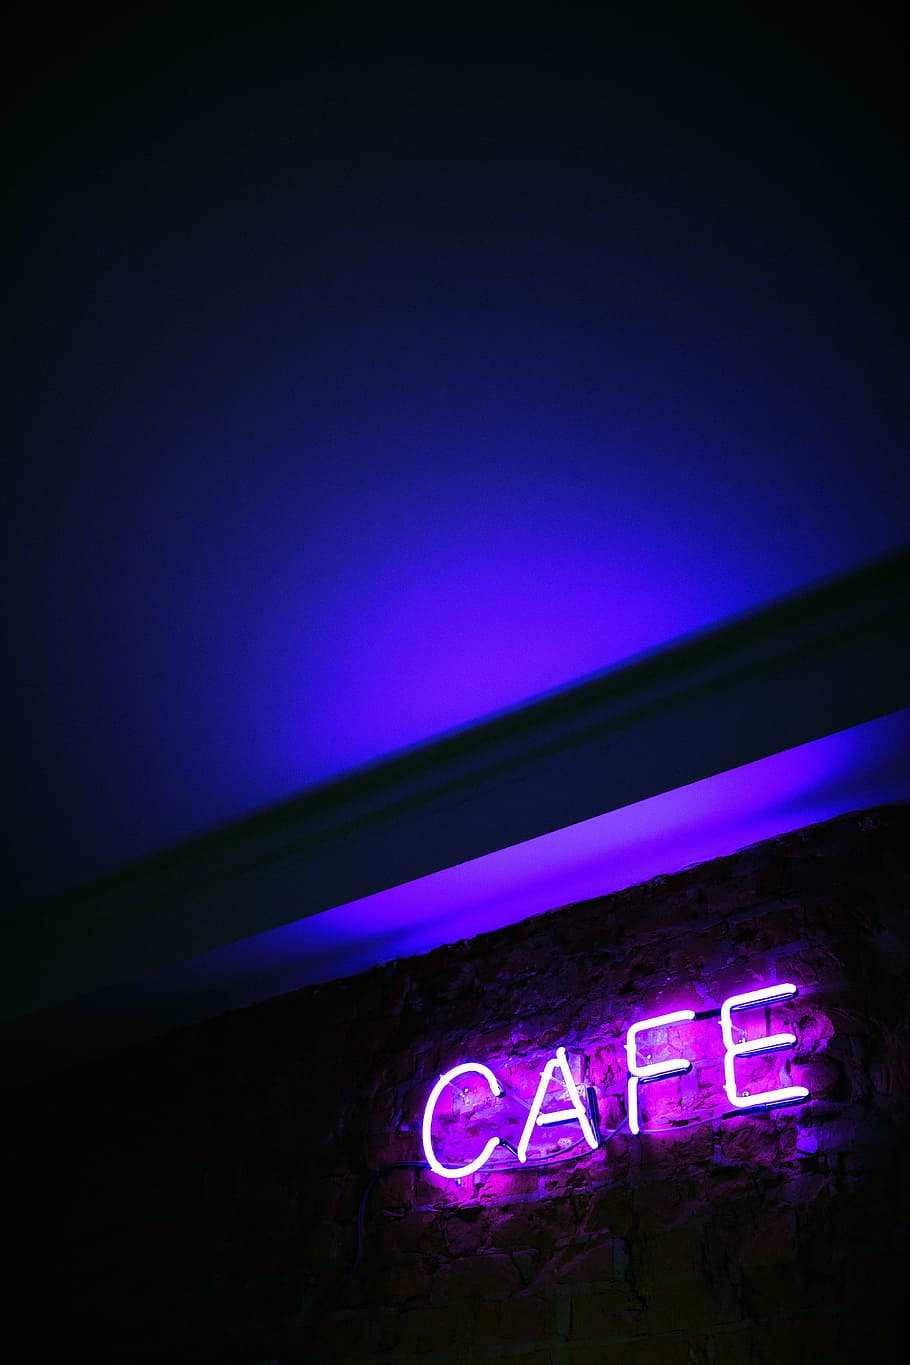 CAFE neon signage mounted on wall, Cafe LED signage, blue, purple, HD wallpaper